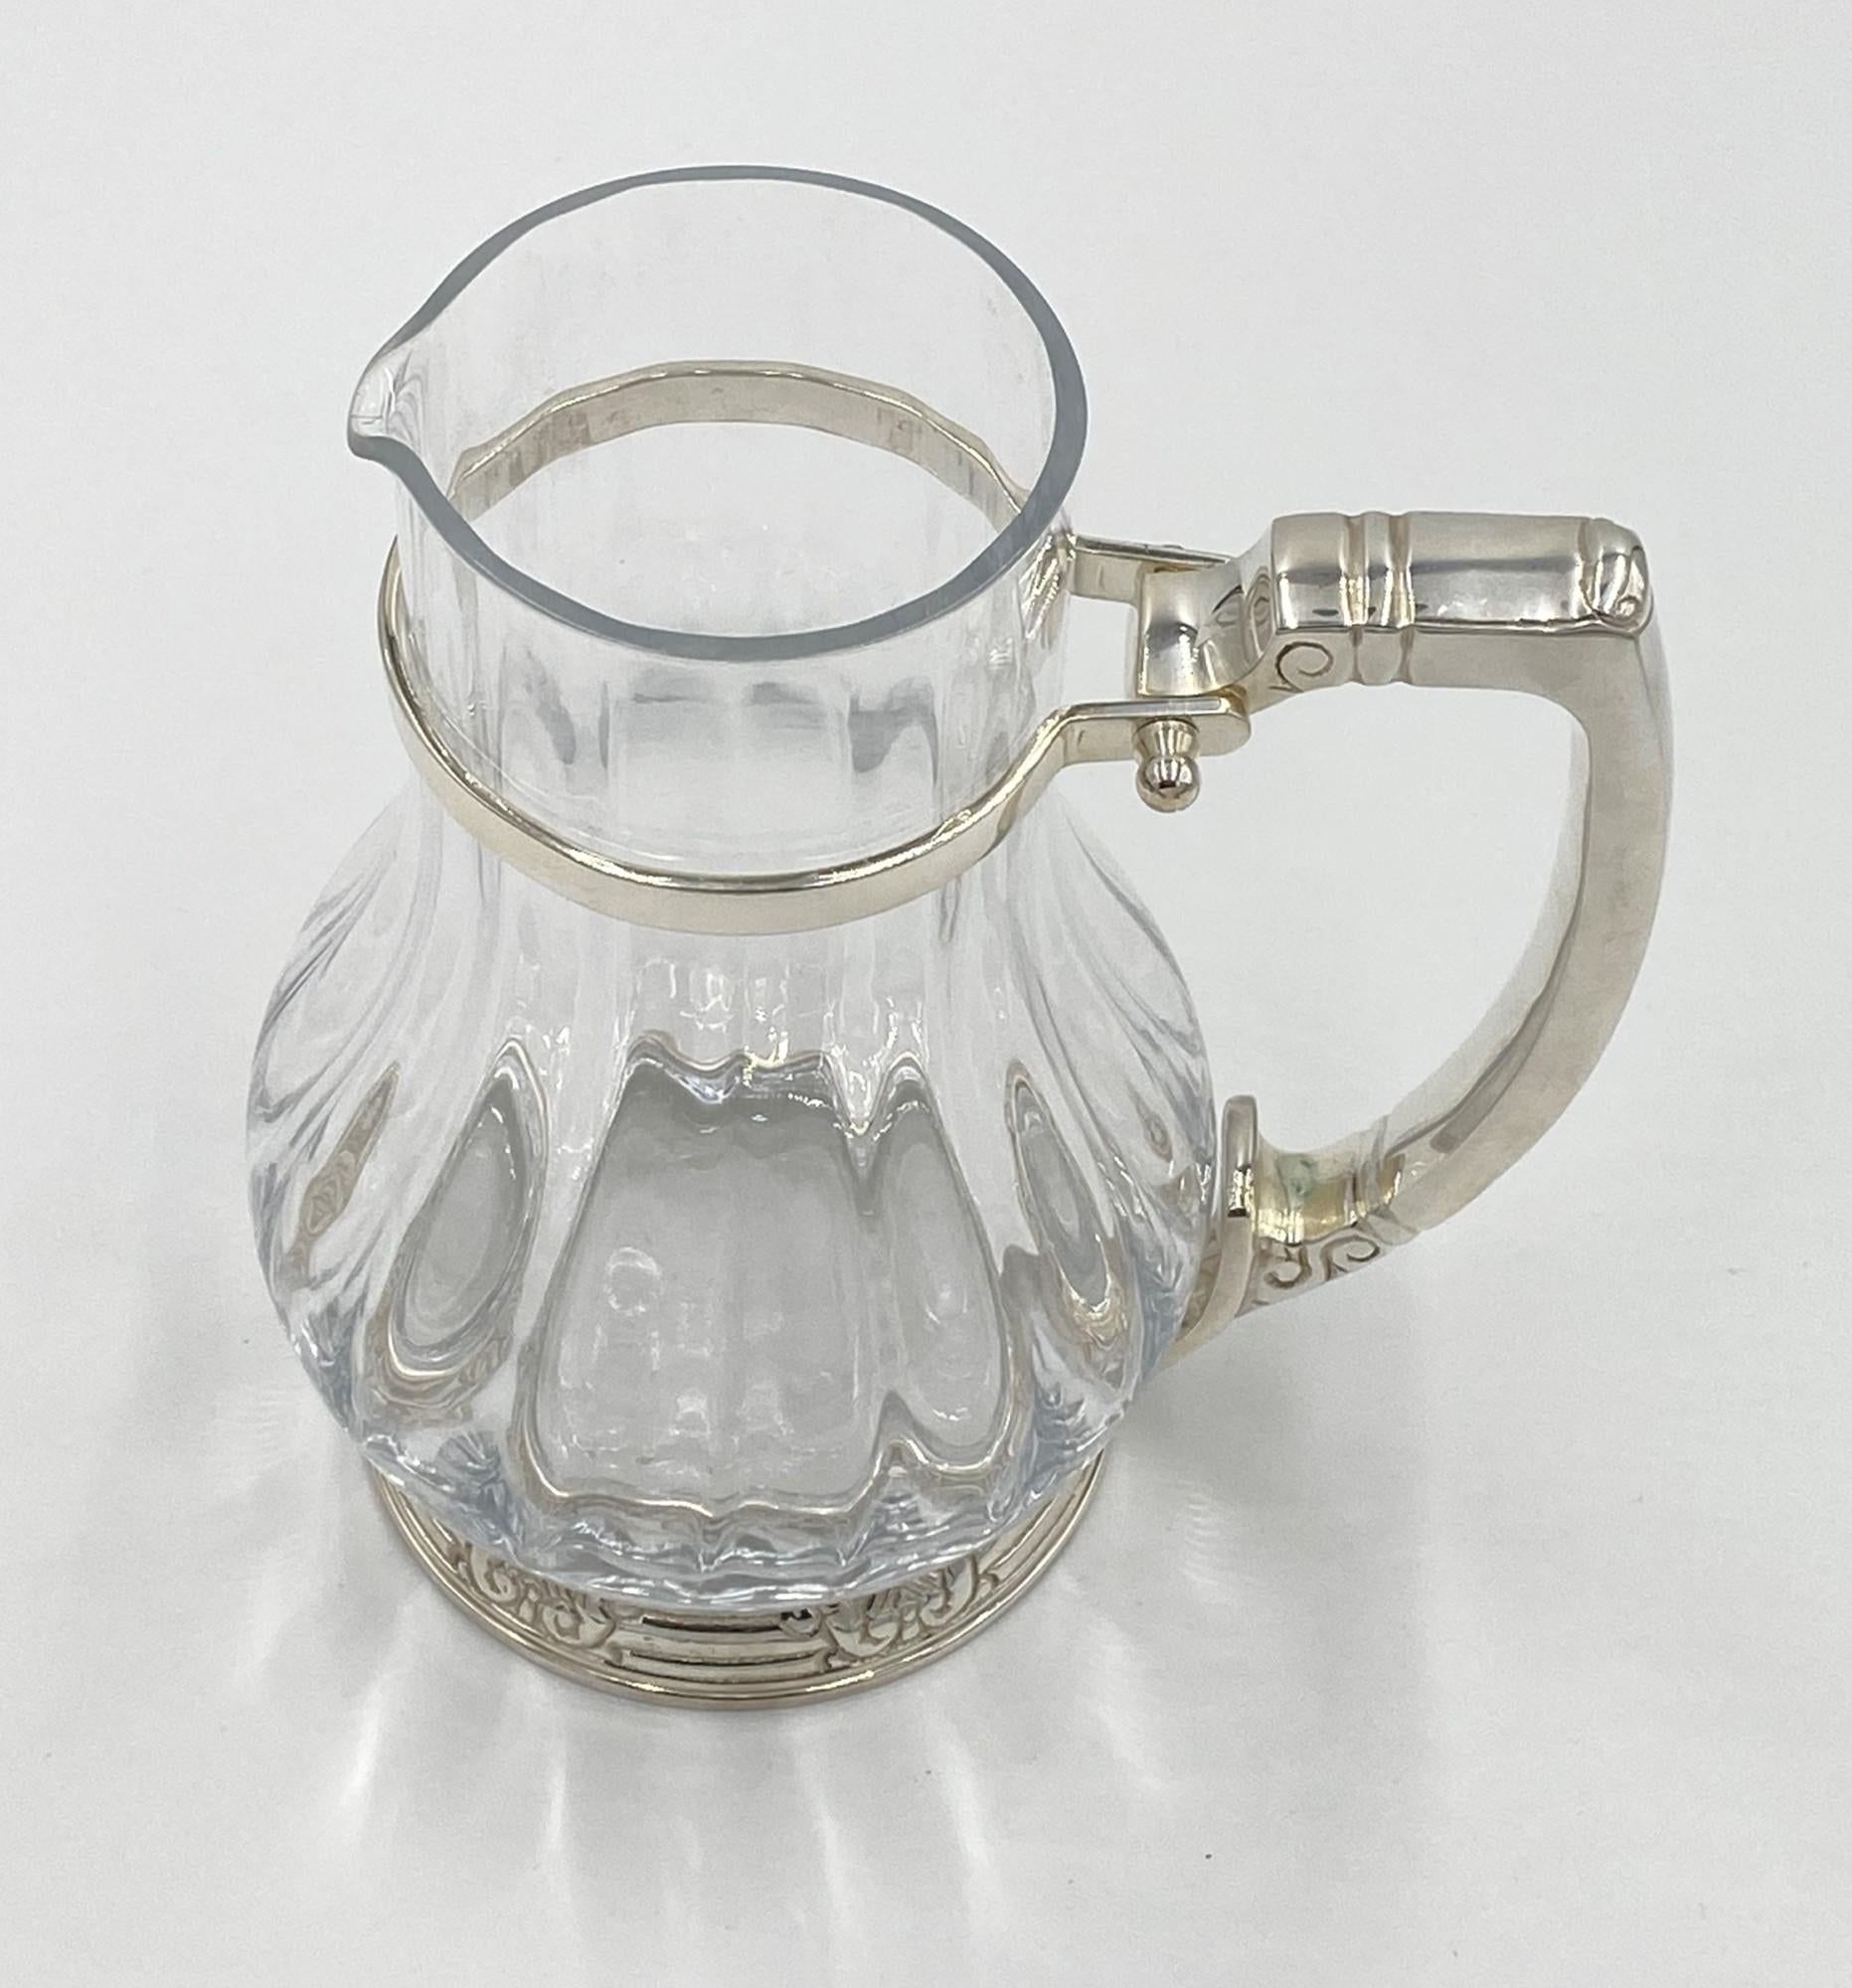 American NYC Waldorf Astoria Hotel Silver Plated Water Pitcher Art Deco Style